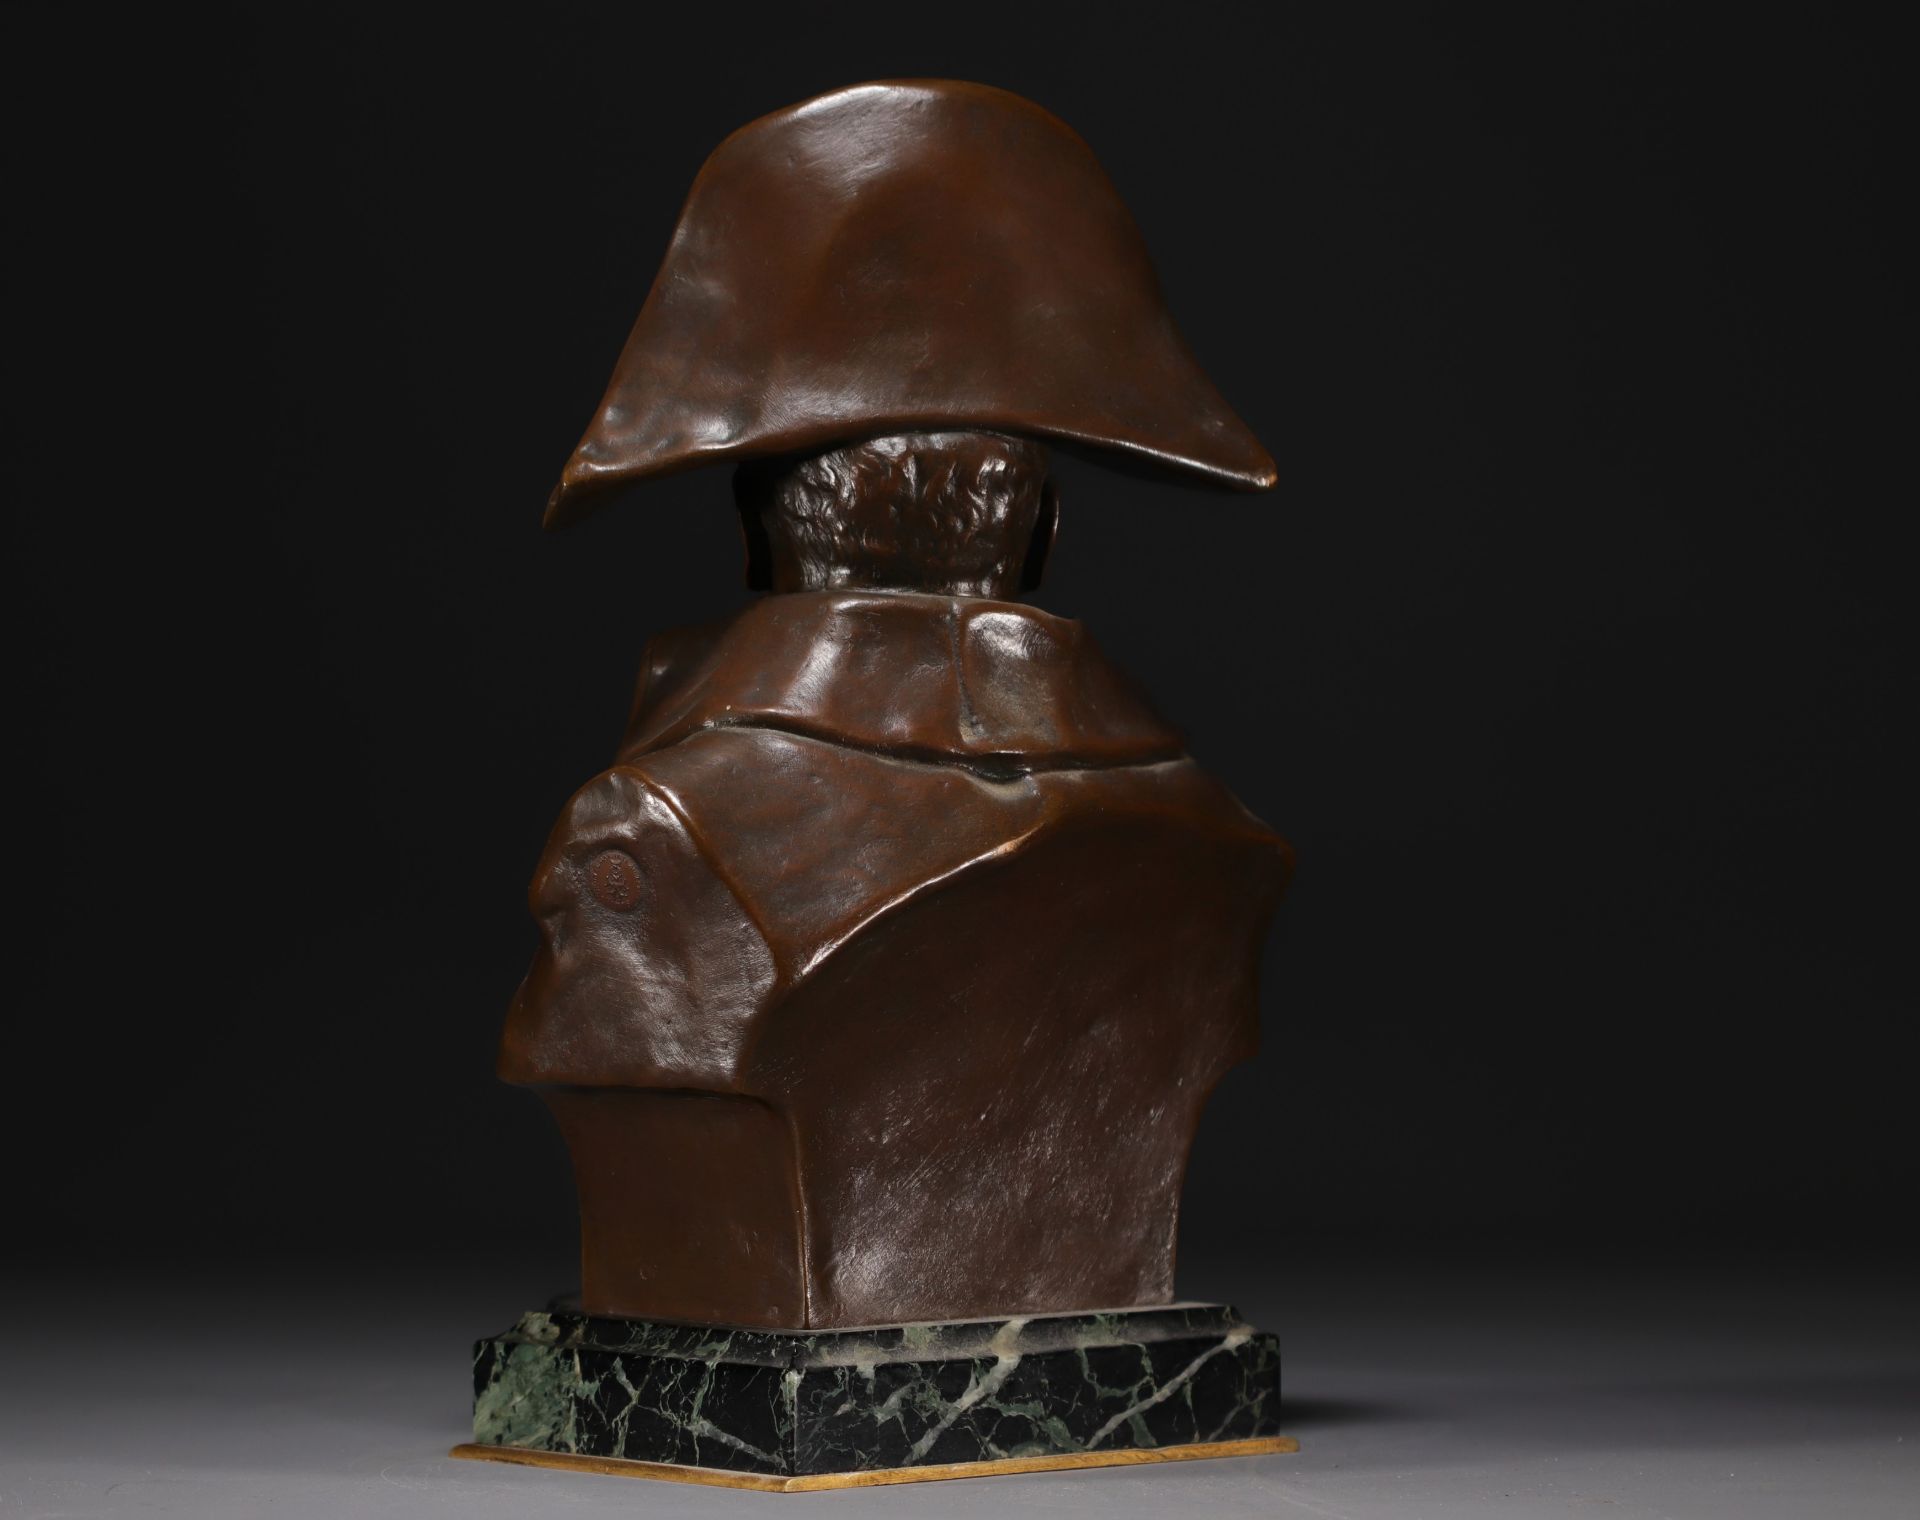 Renzo COLOMBO (1856-1885) Bust of Napoleon 1st in bronze with shaded brown patina, 1885. - Image 4 of 5